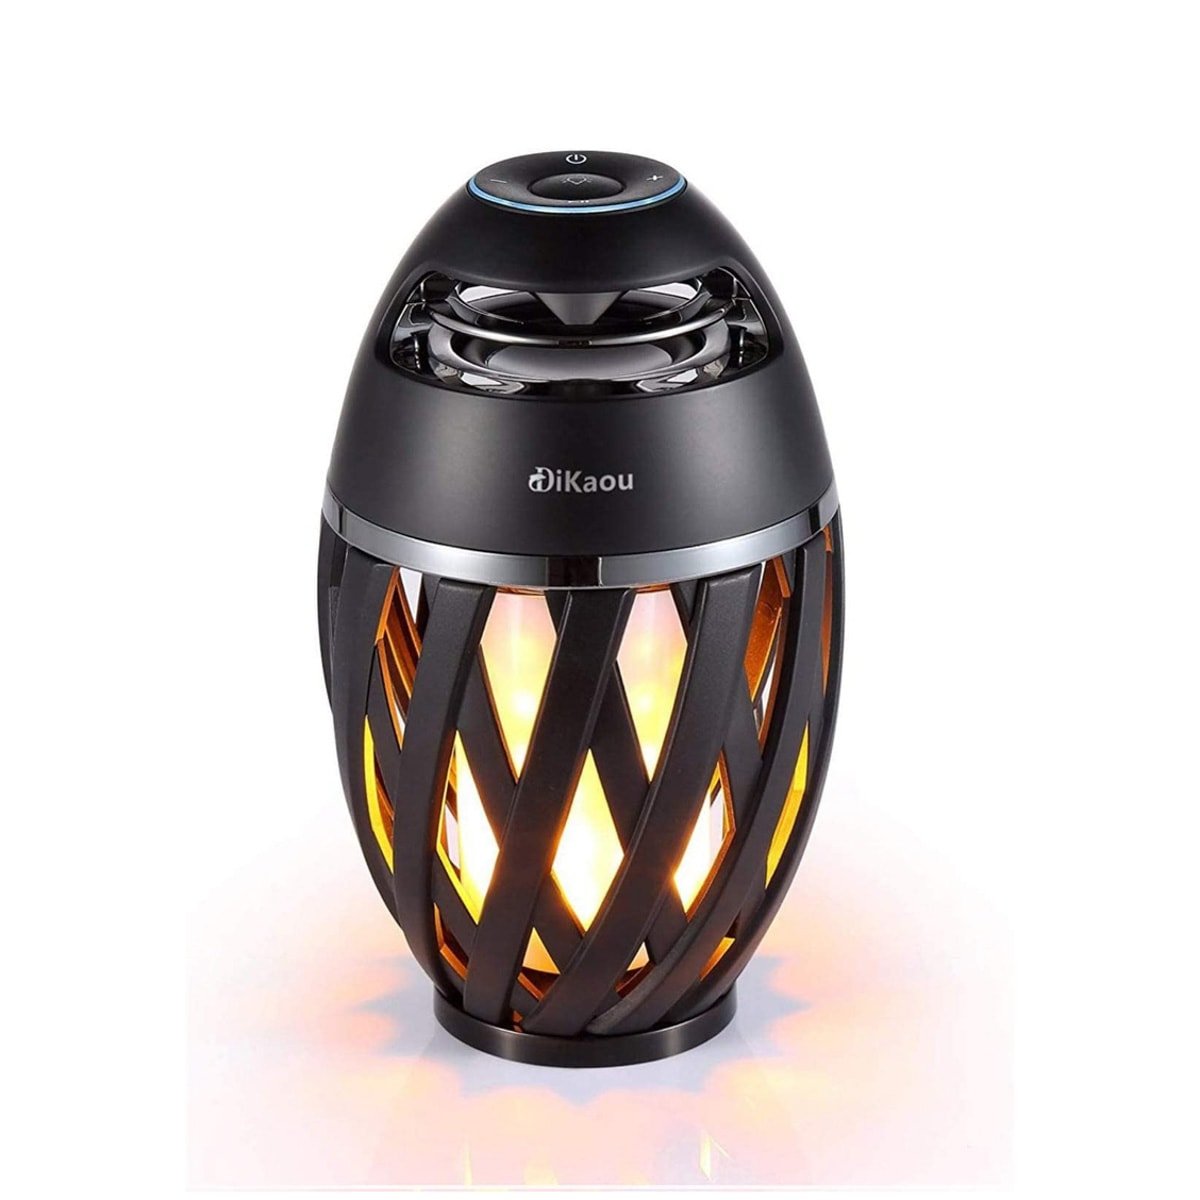 A black led outdoor flame light that doubles as a speaker.